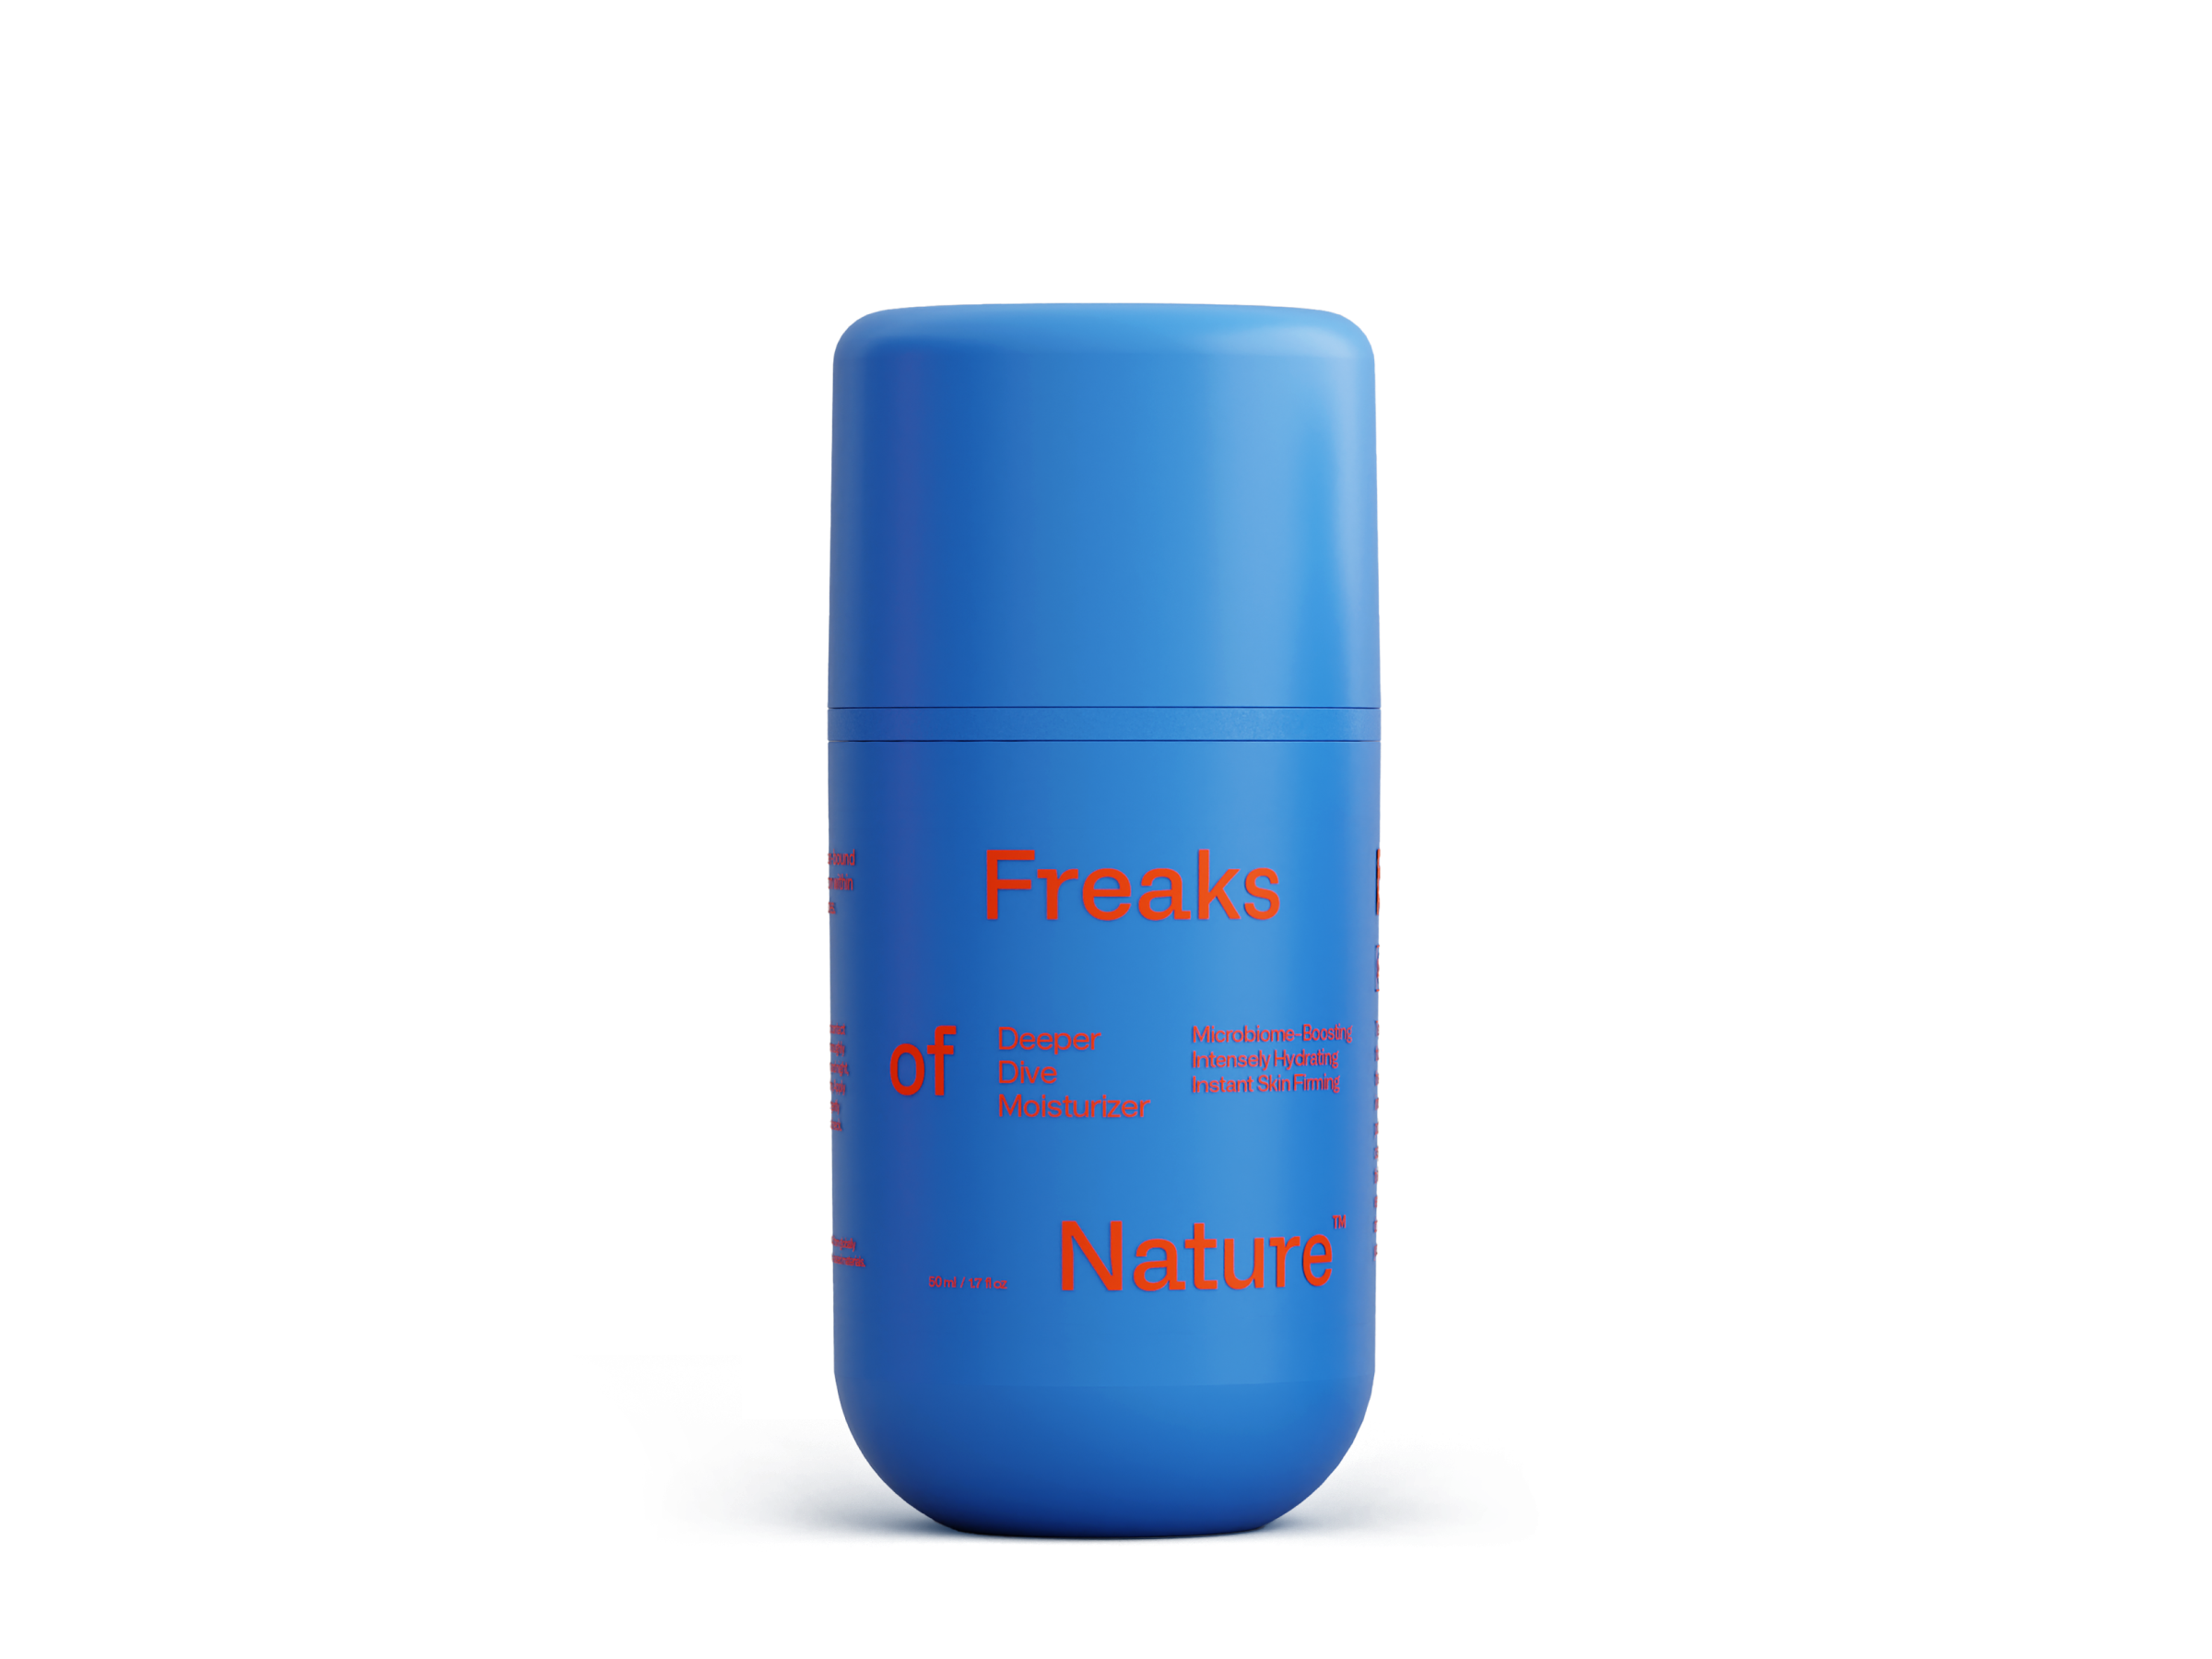 A blue cylindrical bottle with red text on it. The text includes partial words like "Nature" and "Freaks," along with other text elements that are not fully visible or cut off. This minimalist design houses the Deeper Dive Moisturizer enriched with vegan shark squalane, perfect for microbiome-balancing care from Freaks of Nature Skincare.